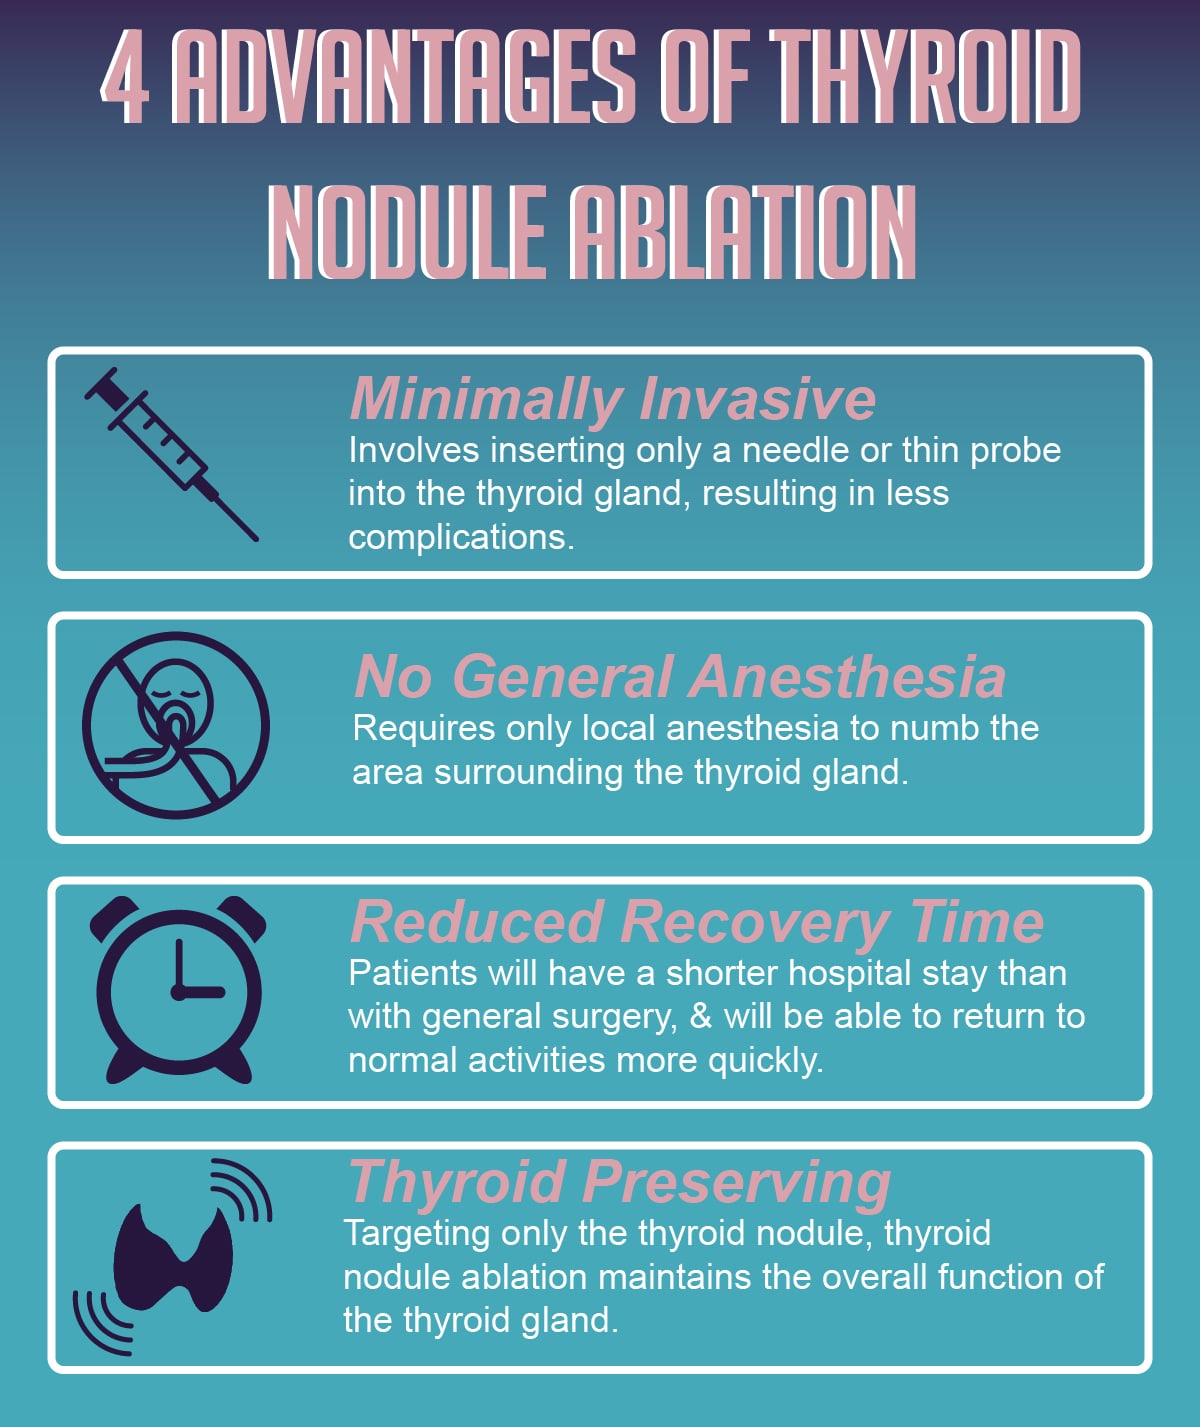 Graphic explaining 4 Advantages of Thyroid Nodule Ablation. 1) Minimally Invasive Involves inserting only a needle or thin probe into the thyroid gland, resulting in less complications. 2) No General Anesthesia Requires only local anesthesia to numb the area surrounding the thyroid gland.Reduced 3) Recovery Time Patients will have a shorter hospital stay than with general surgery, & will be able to return to normal activities more quickly. 4) Thyroid Preserving Targeting only the thyroid nodule, thyroid nodule ablation maintains the overall function of the thyroid gland.